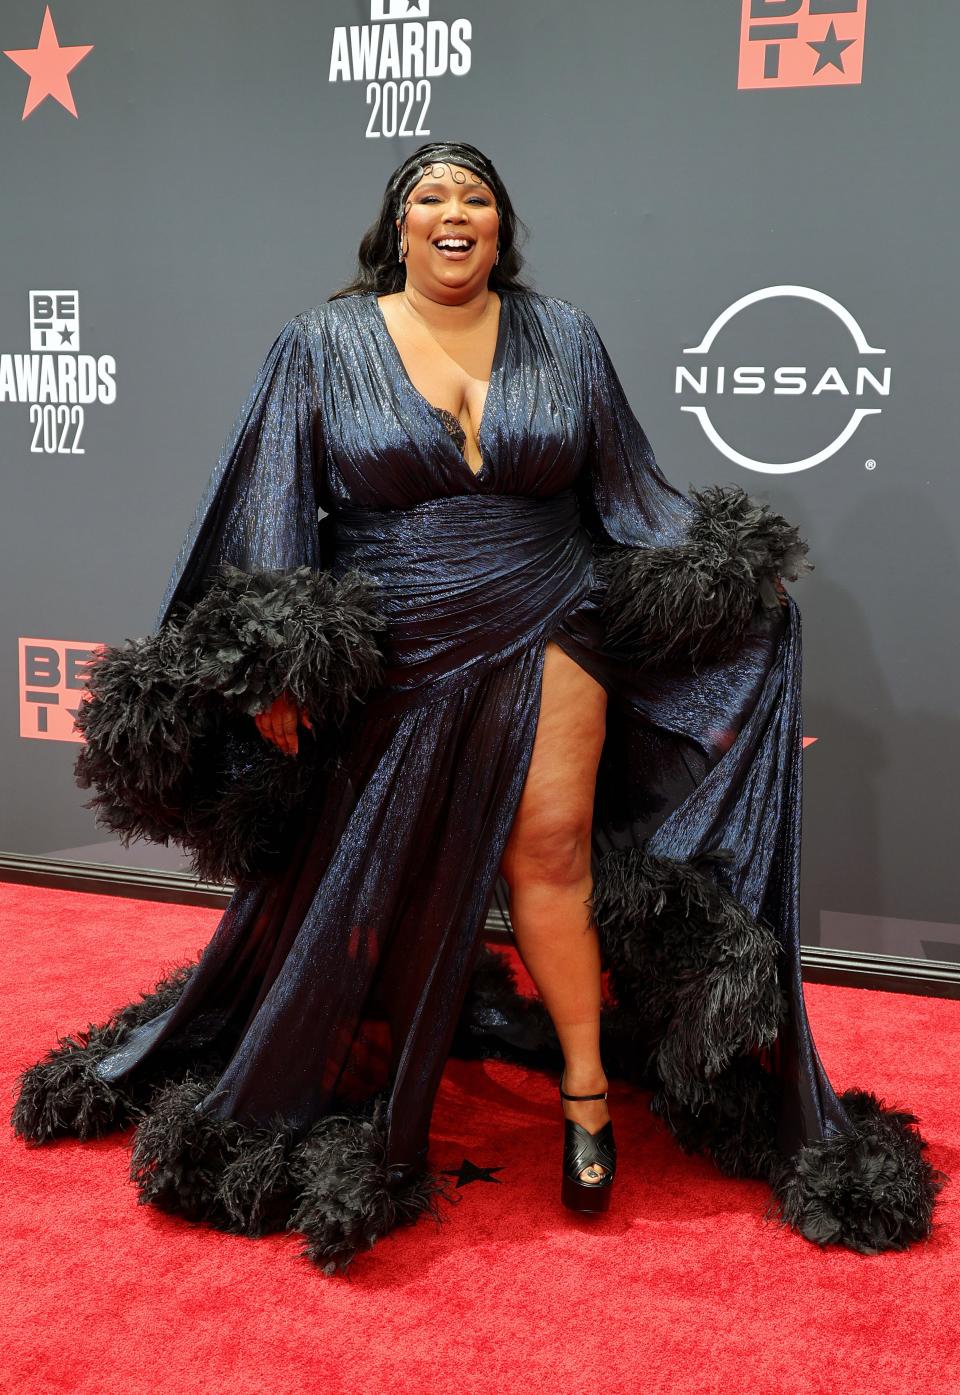 Lizzo attends the 2022 BET Awards at Microsoft Theater in Los Angeles, California.